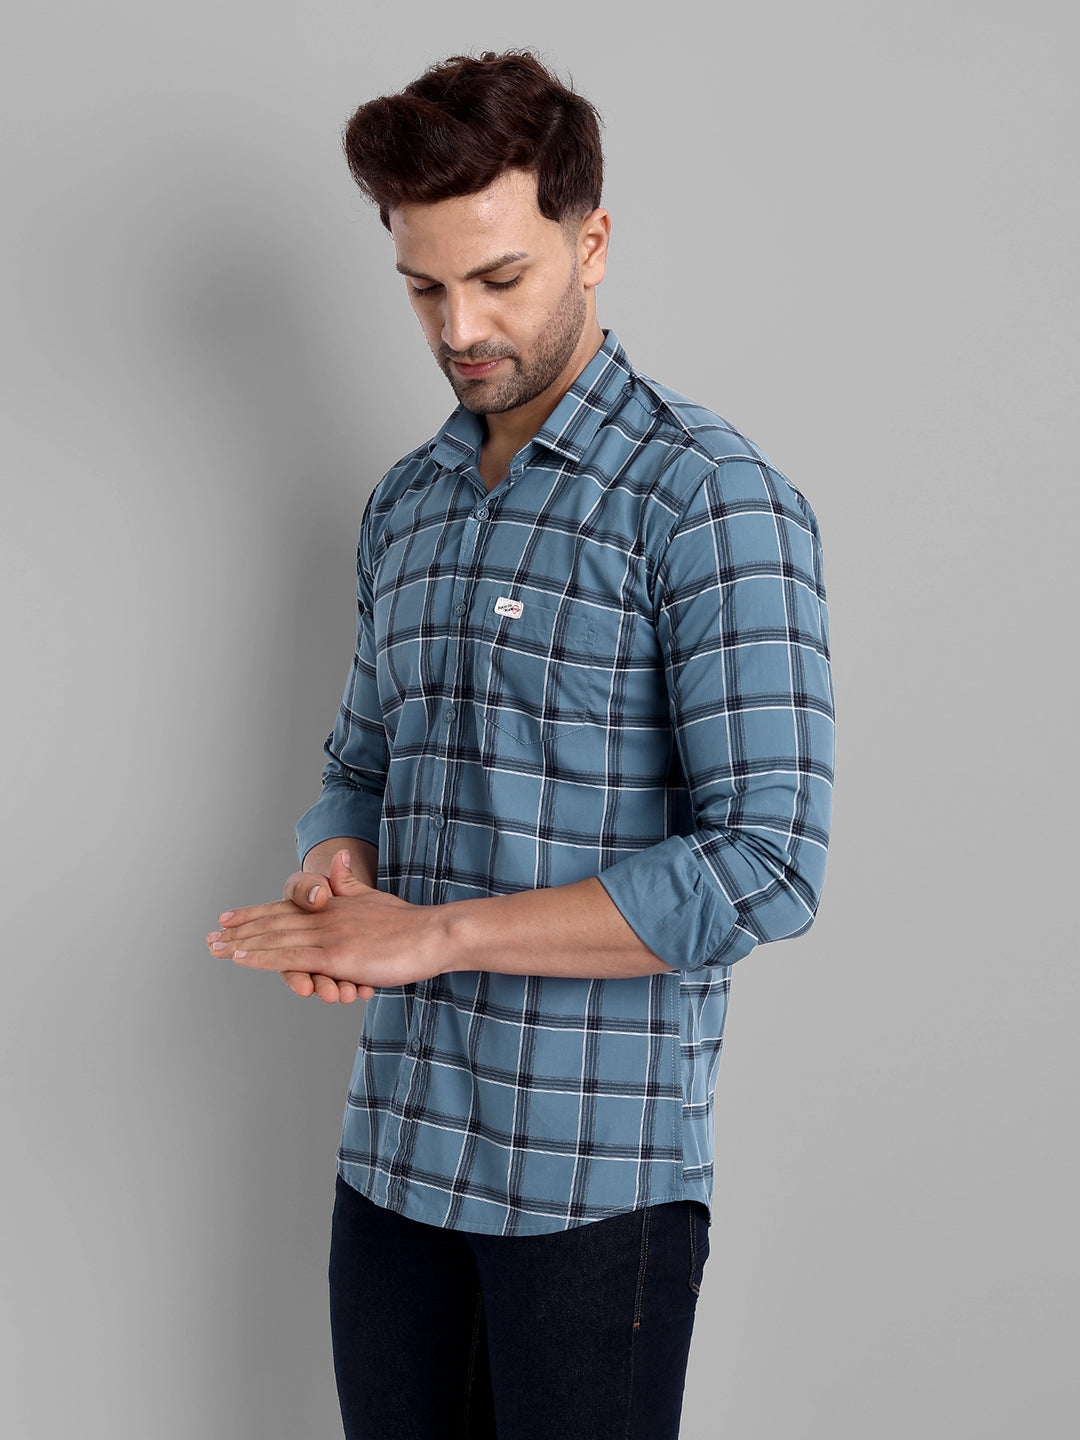 Classic Checkmate Pure Cotton Checkered Shirt - Greyish Blue